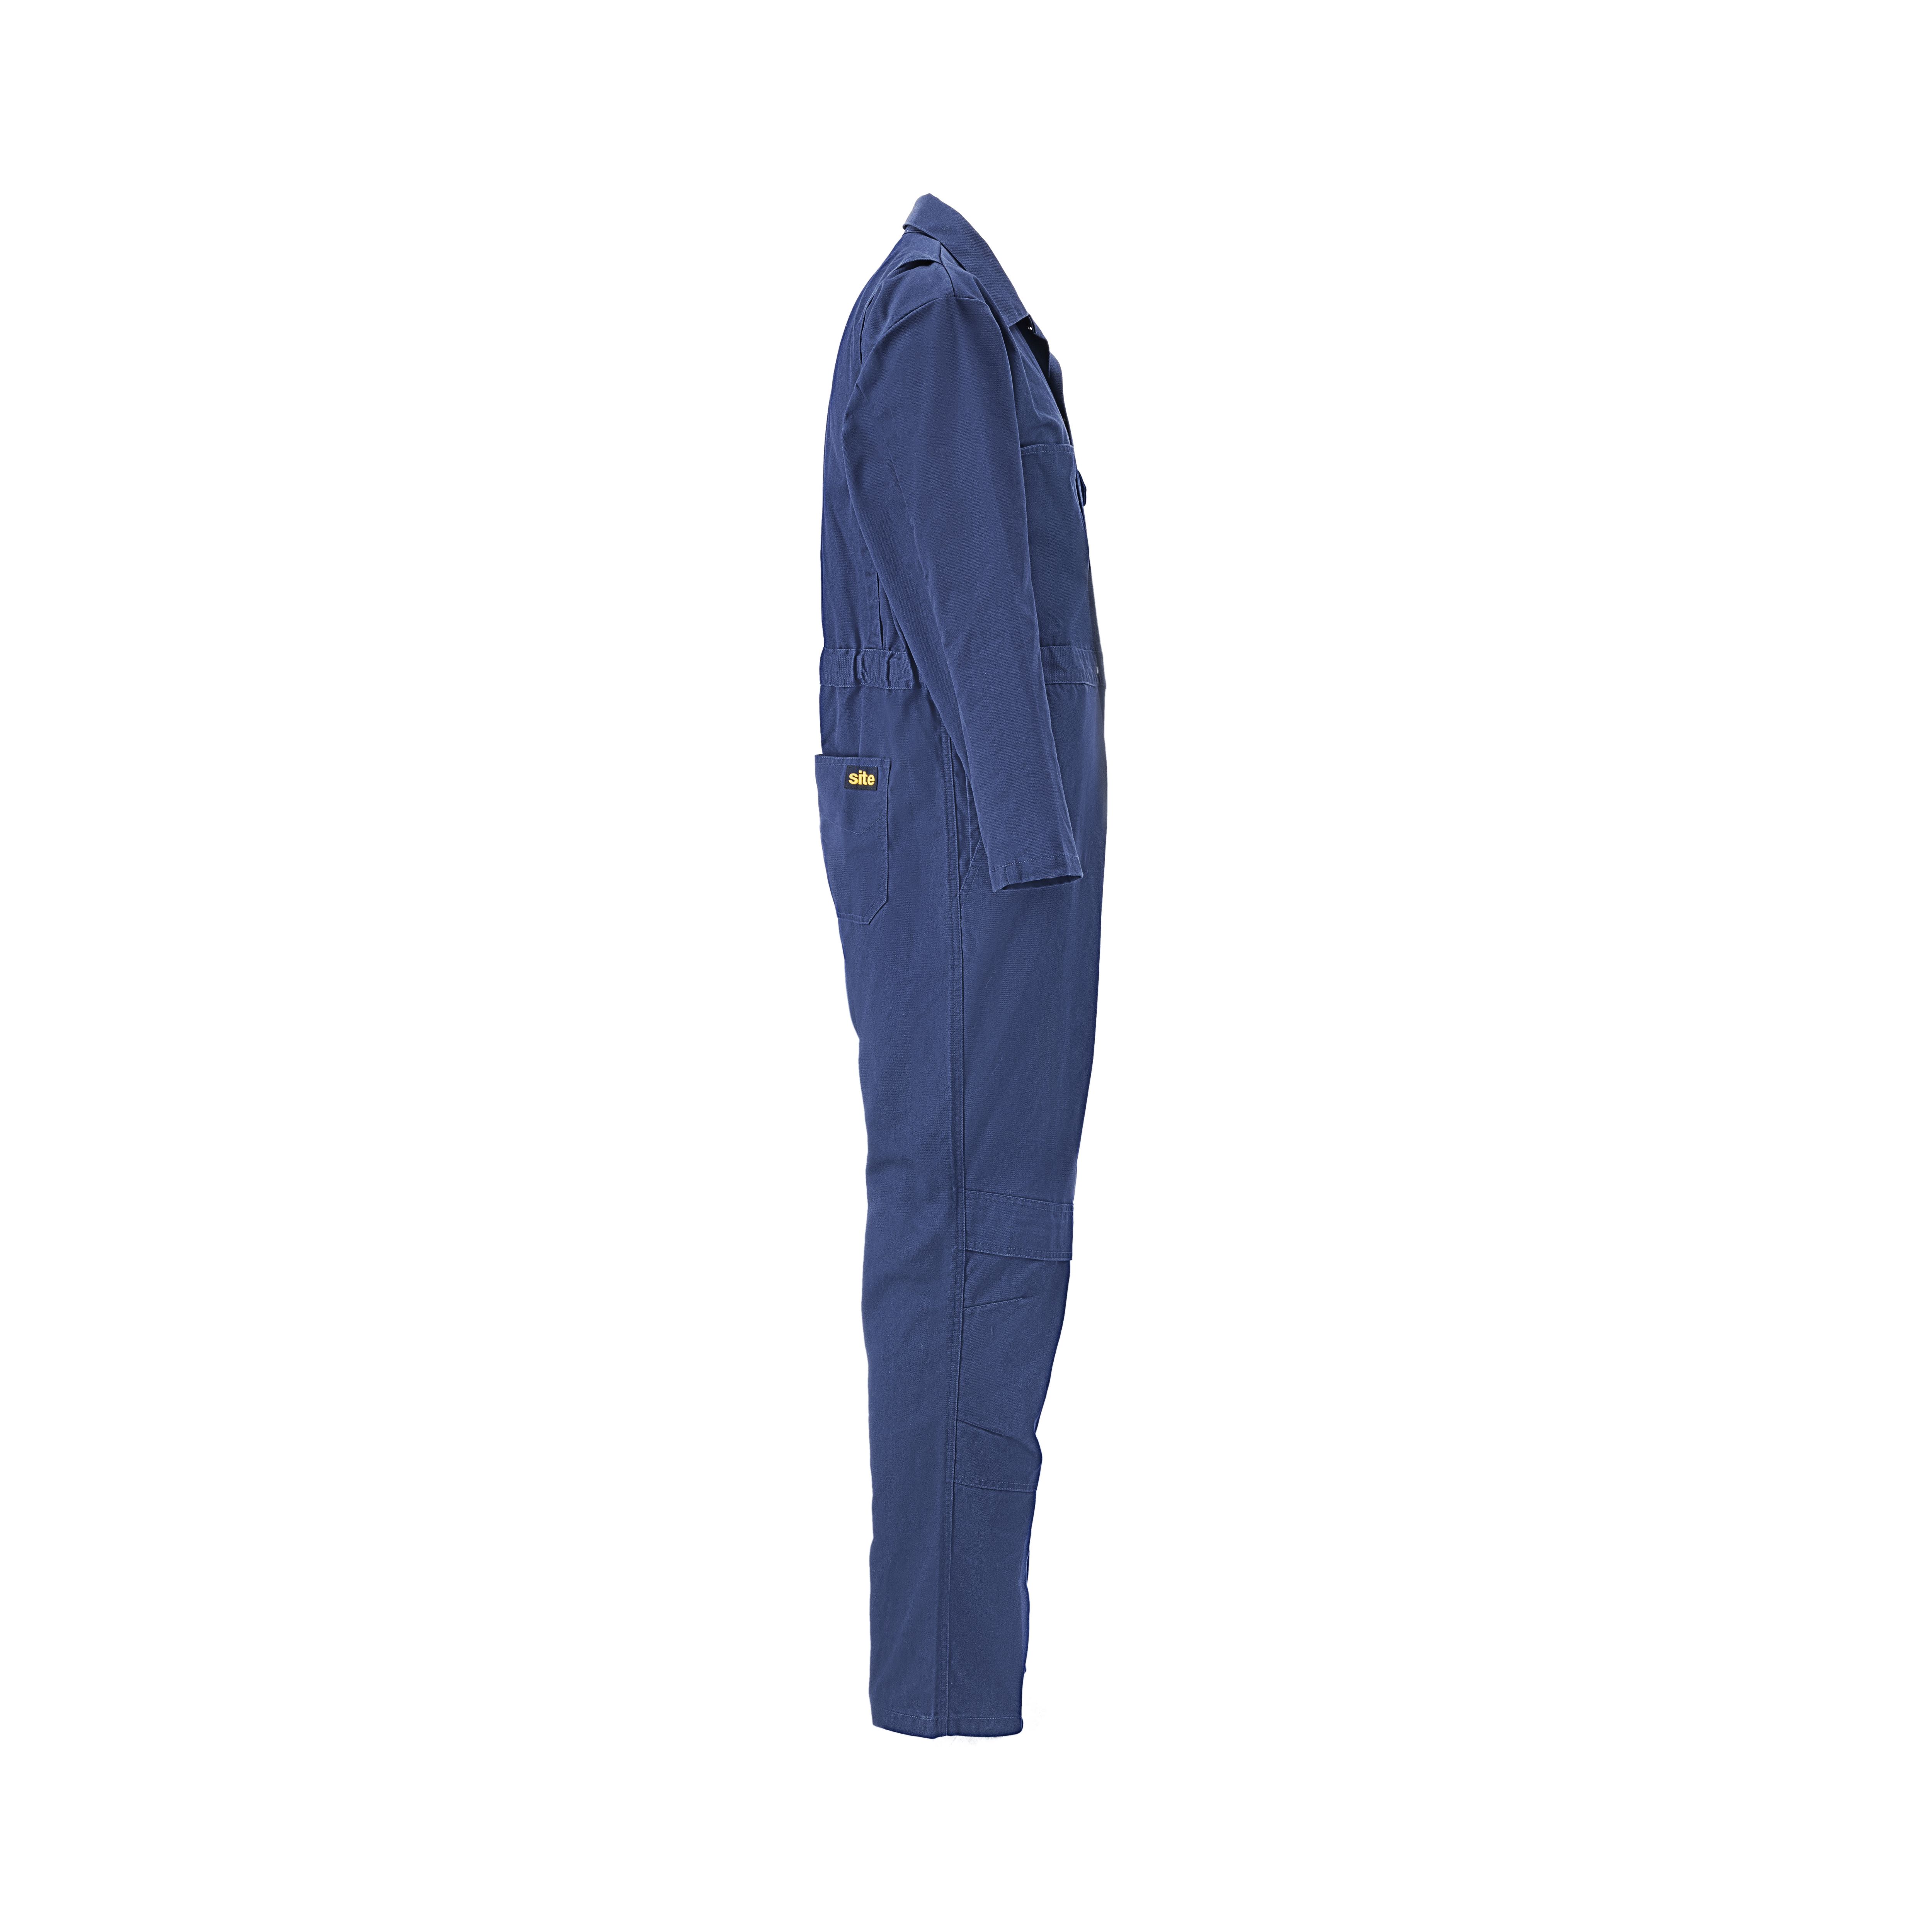 Site Almer Navy Coverall X Large